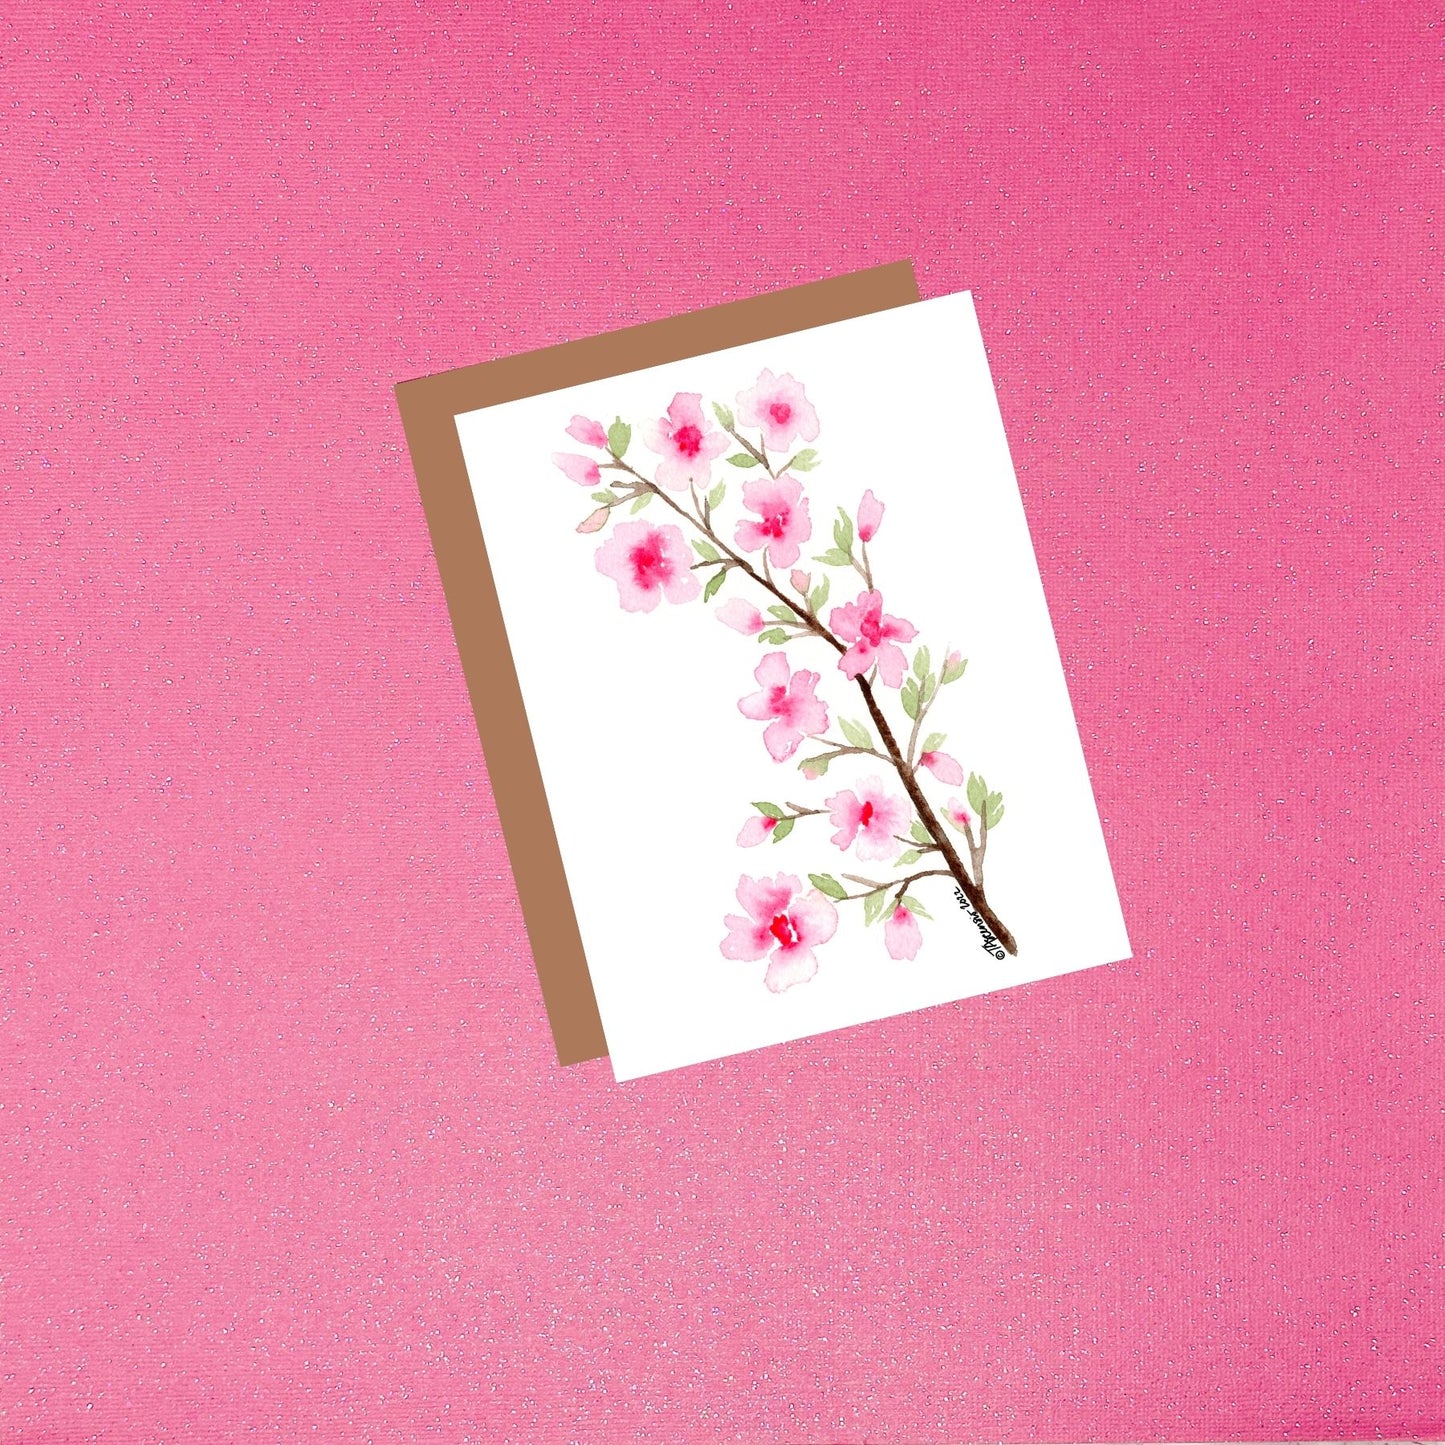 Watercolor Cherry Blossom Branch Greeting Card